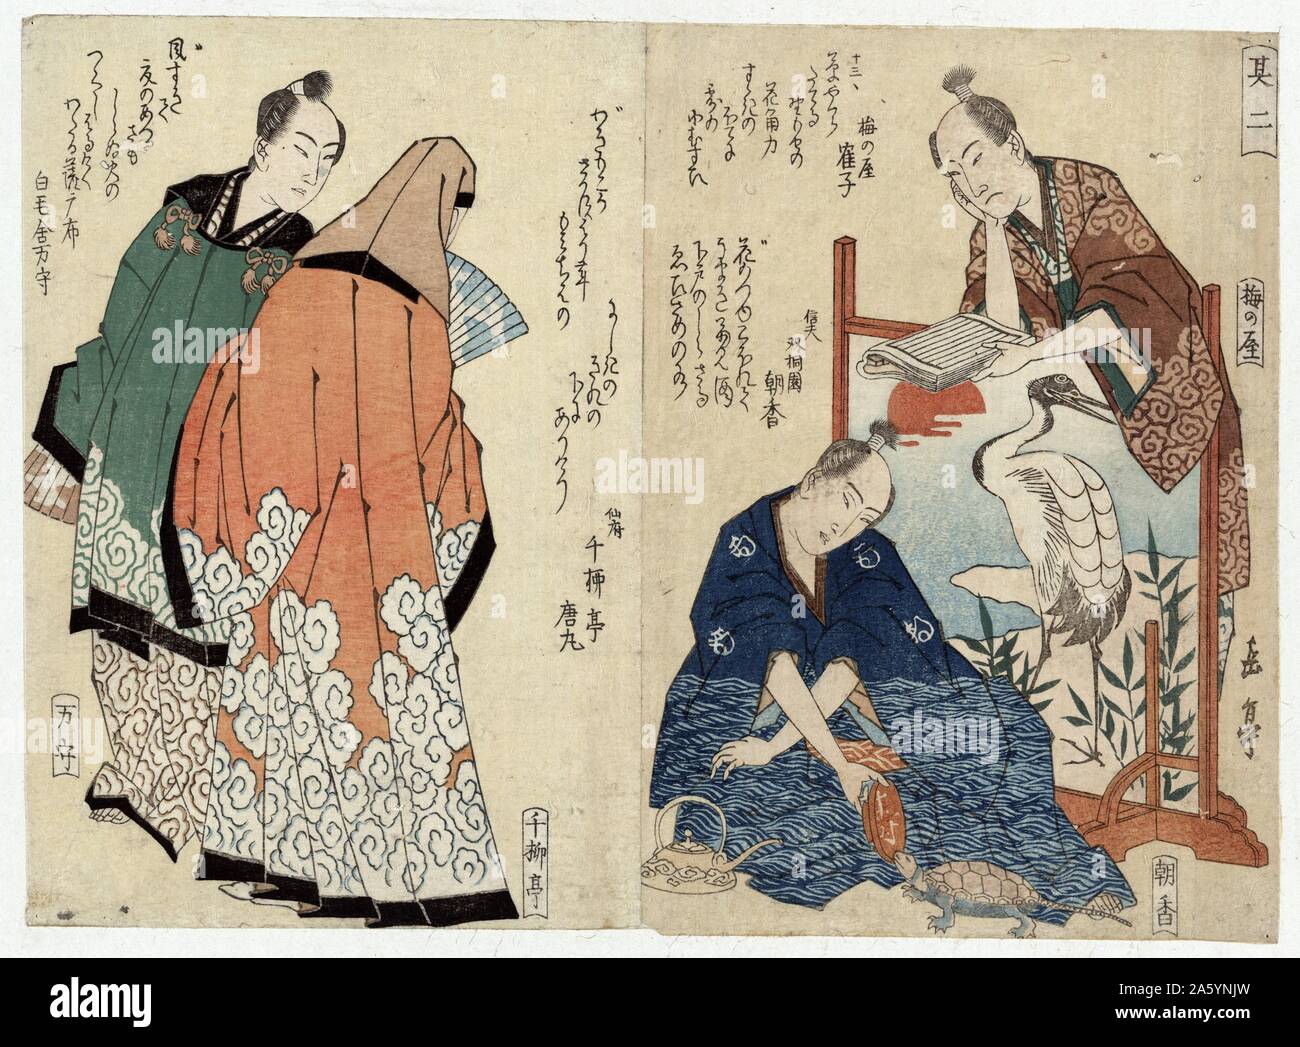 Kyoka hassen sono ni (Translation: Eight Kyoka poets 2) By Yajima, active 19th century, Japanese artist. Painting d to between 1818 and 1824. Print shows three men and a woman (poets); one man is standing behind a low screen, reading; another is sitting on the floor in front of the screen, feeding a turtle from a bowl; the third man and the woman are standing on the left. Stock Photo